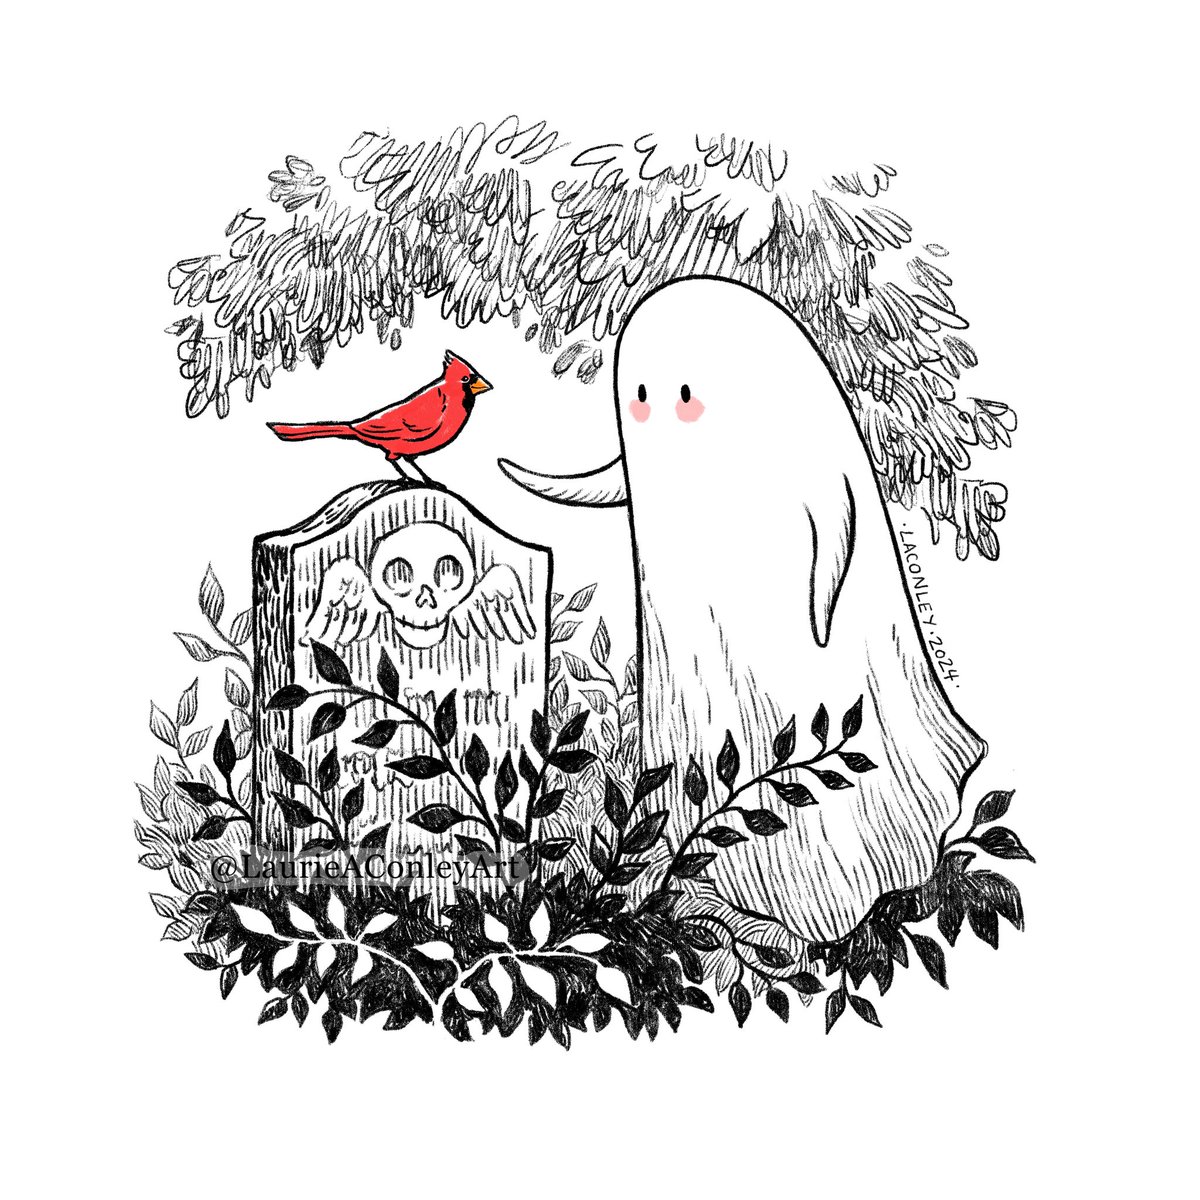 A visitor! Ghost seems to recognize him…. 100 Ghosts: 100/100.👻 #100daydrawing2023 Thank you for following along with the 100 Ghosts project! Thank you for the encouragement, shares and thoughtful comments along the way. And thank you for hosting, @neeshas_art.